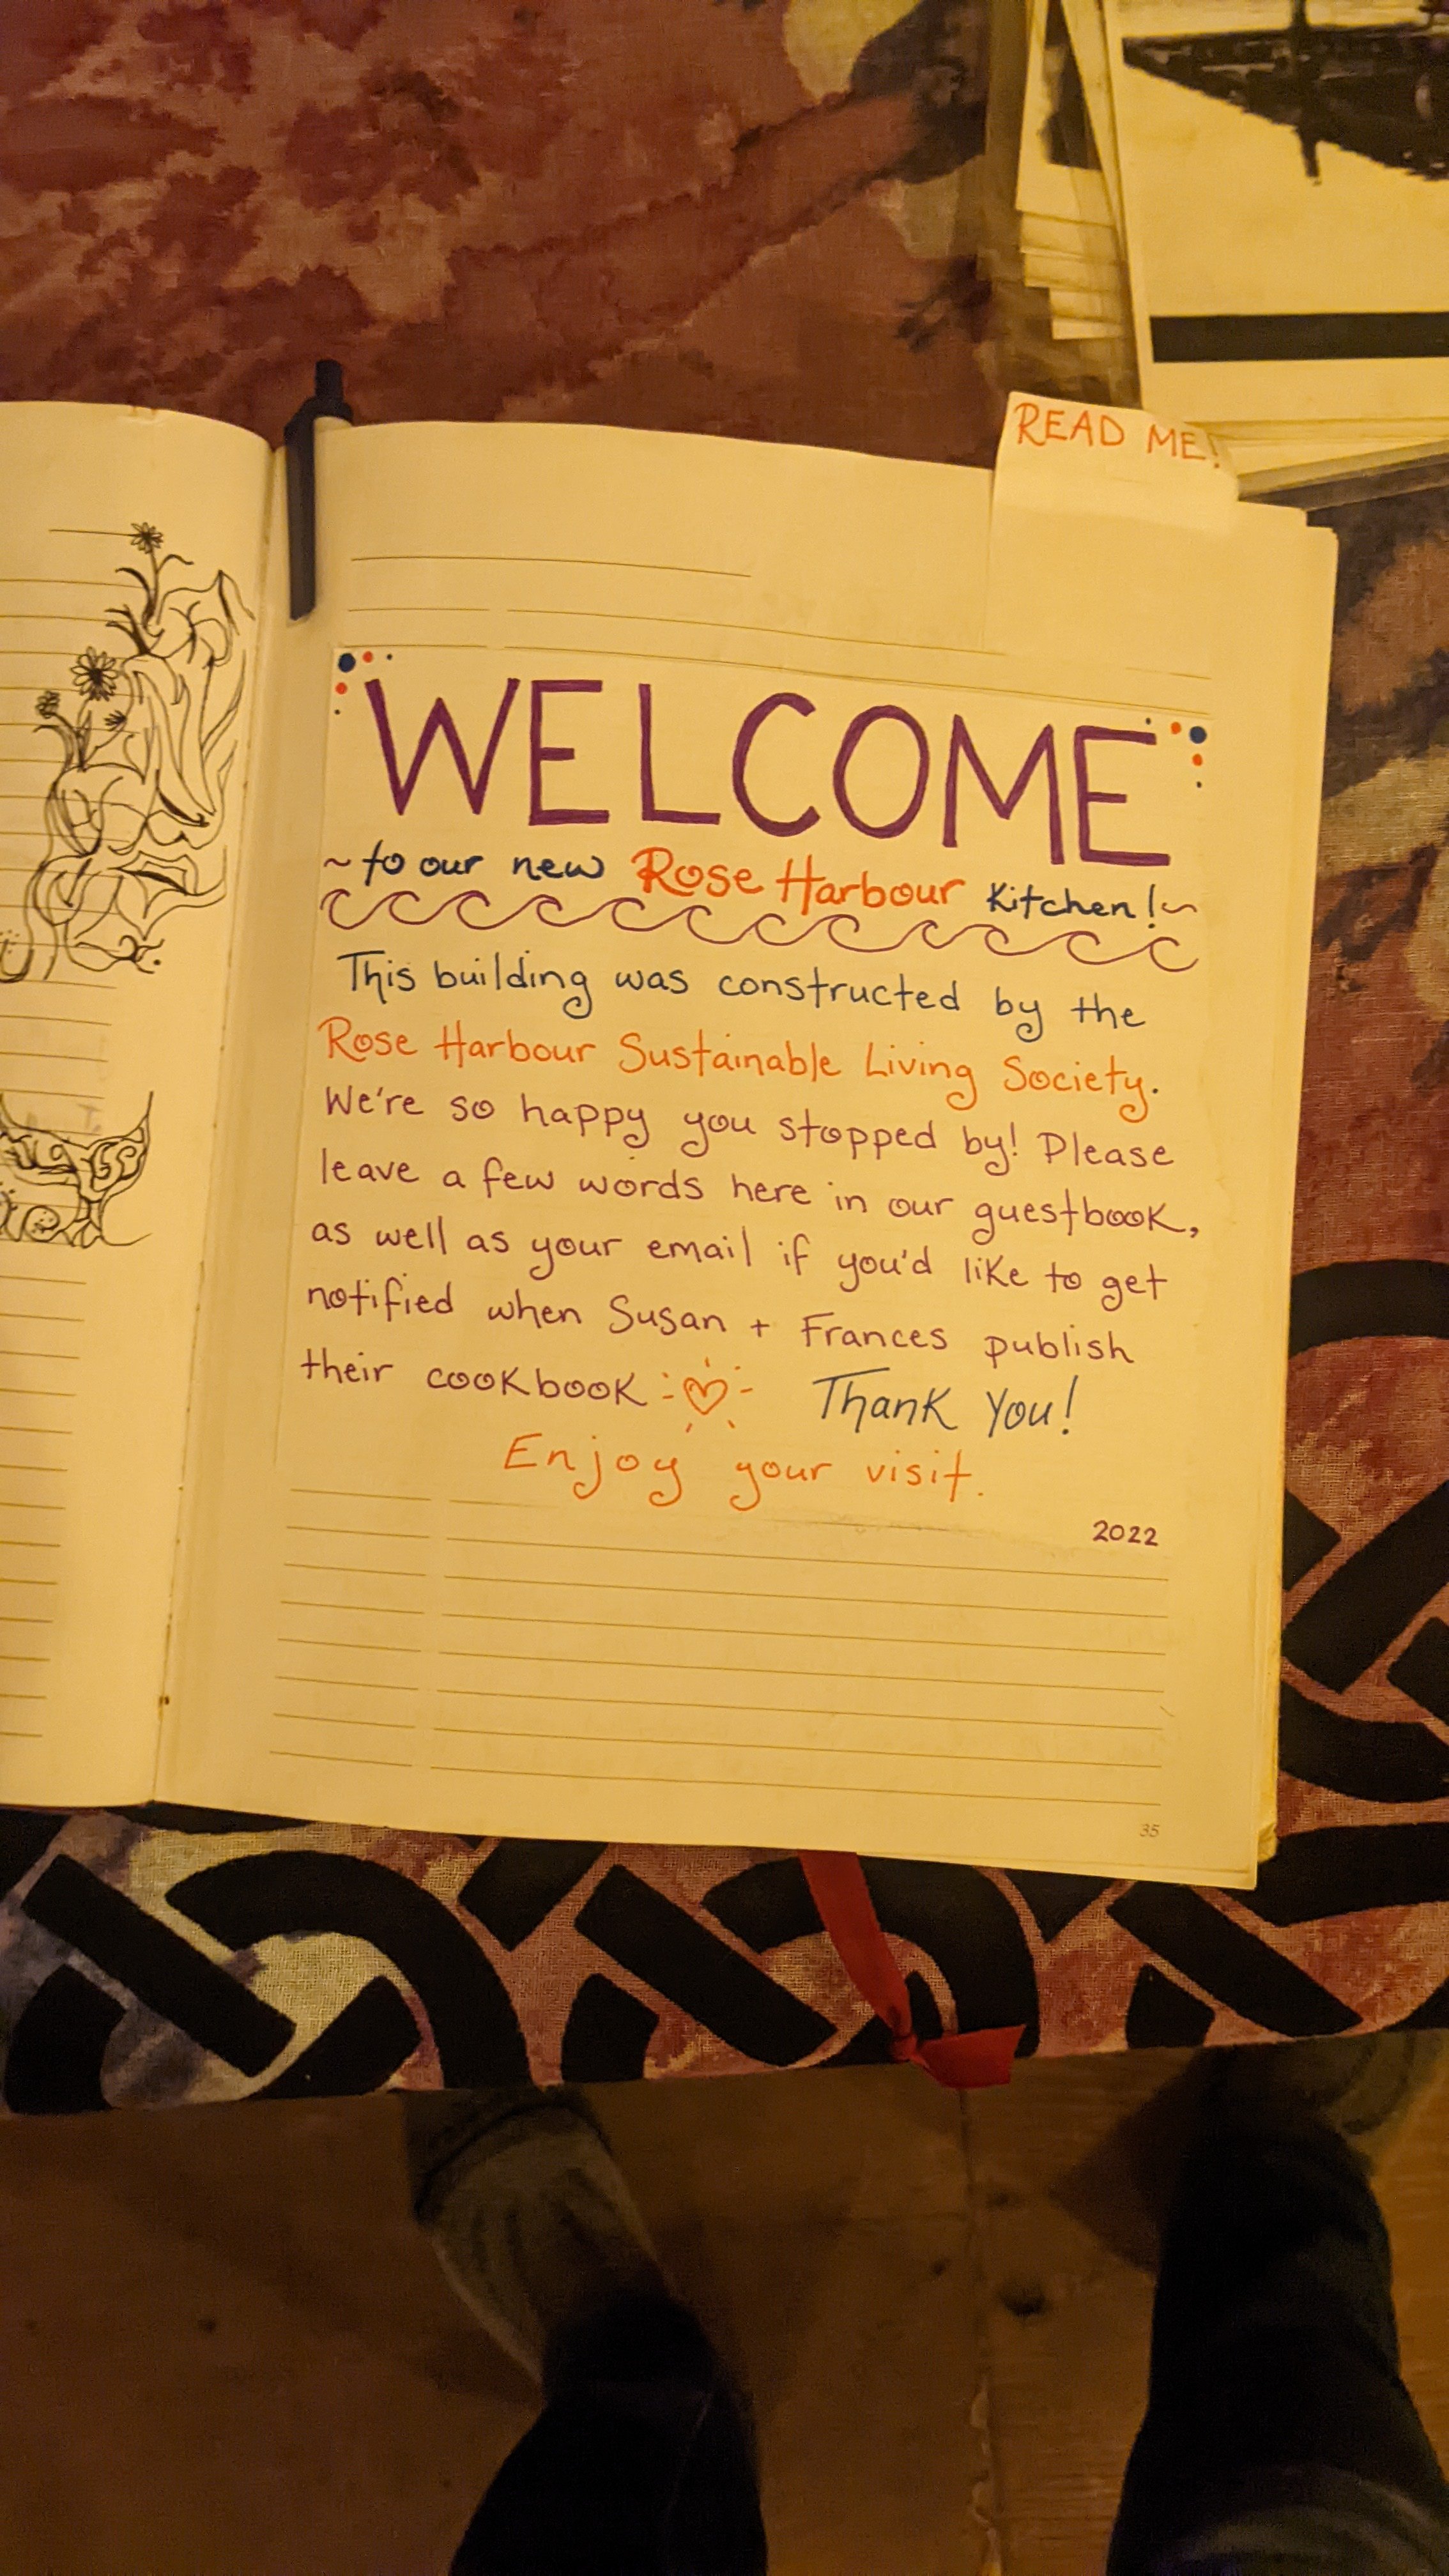  The guesbook for weary travelers to sign. 